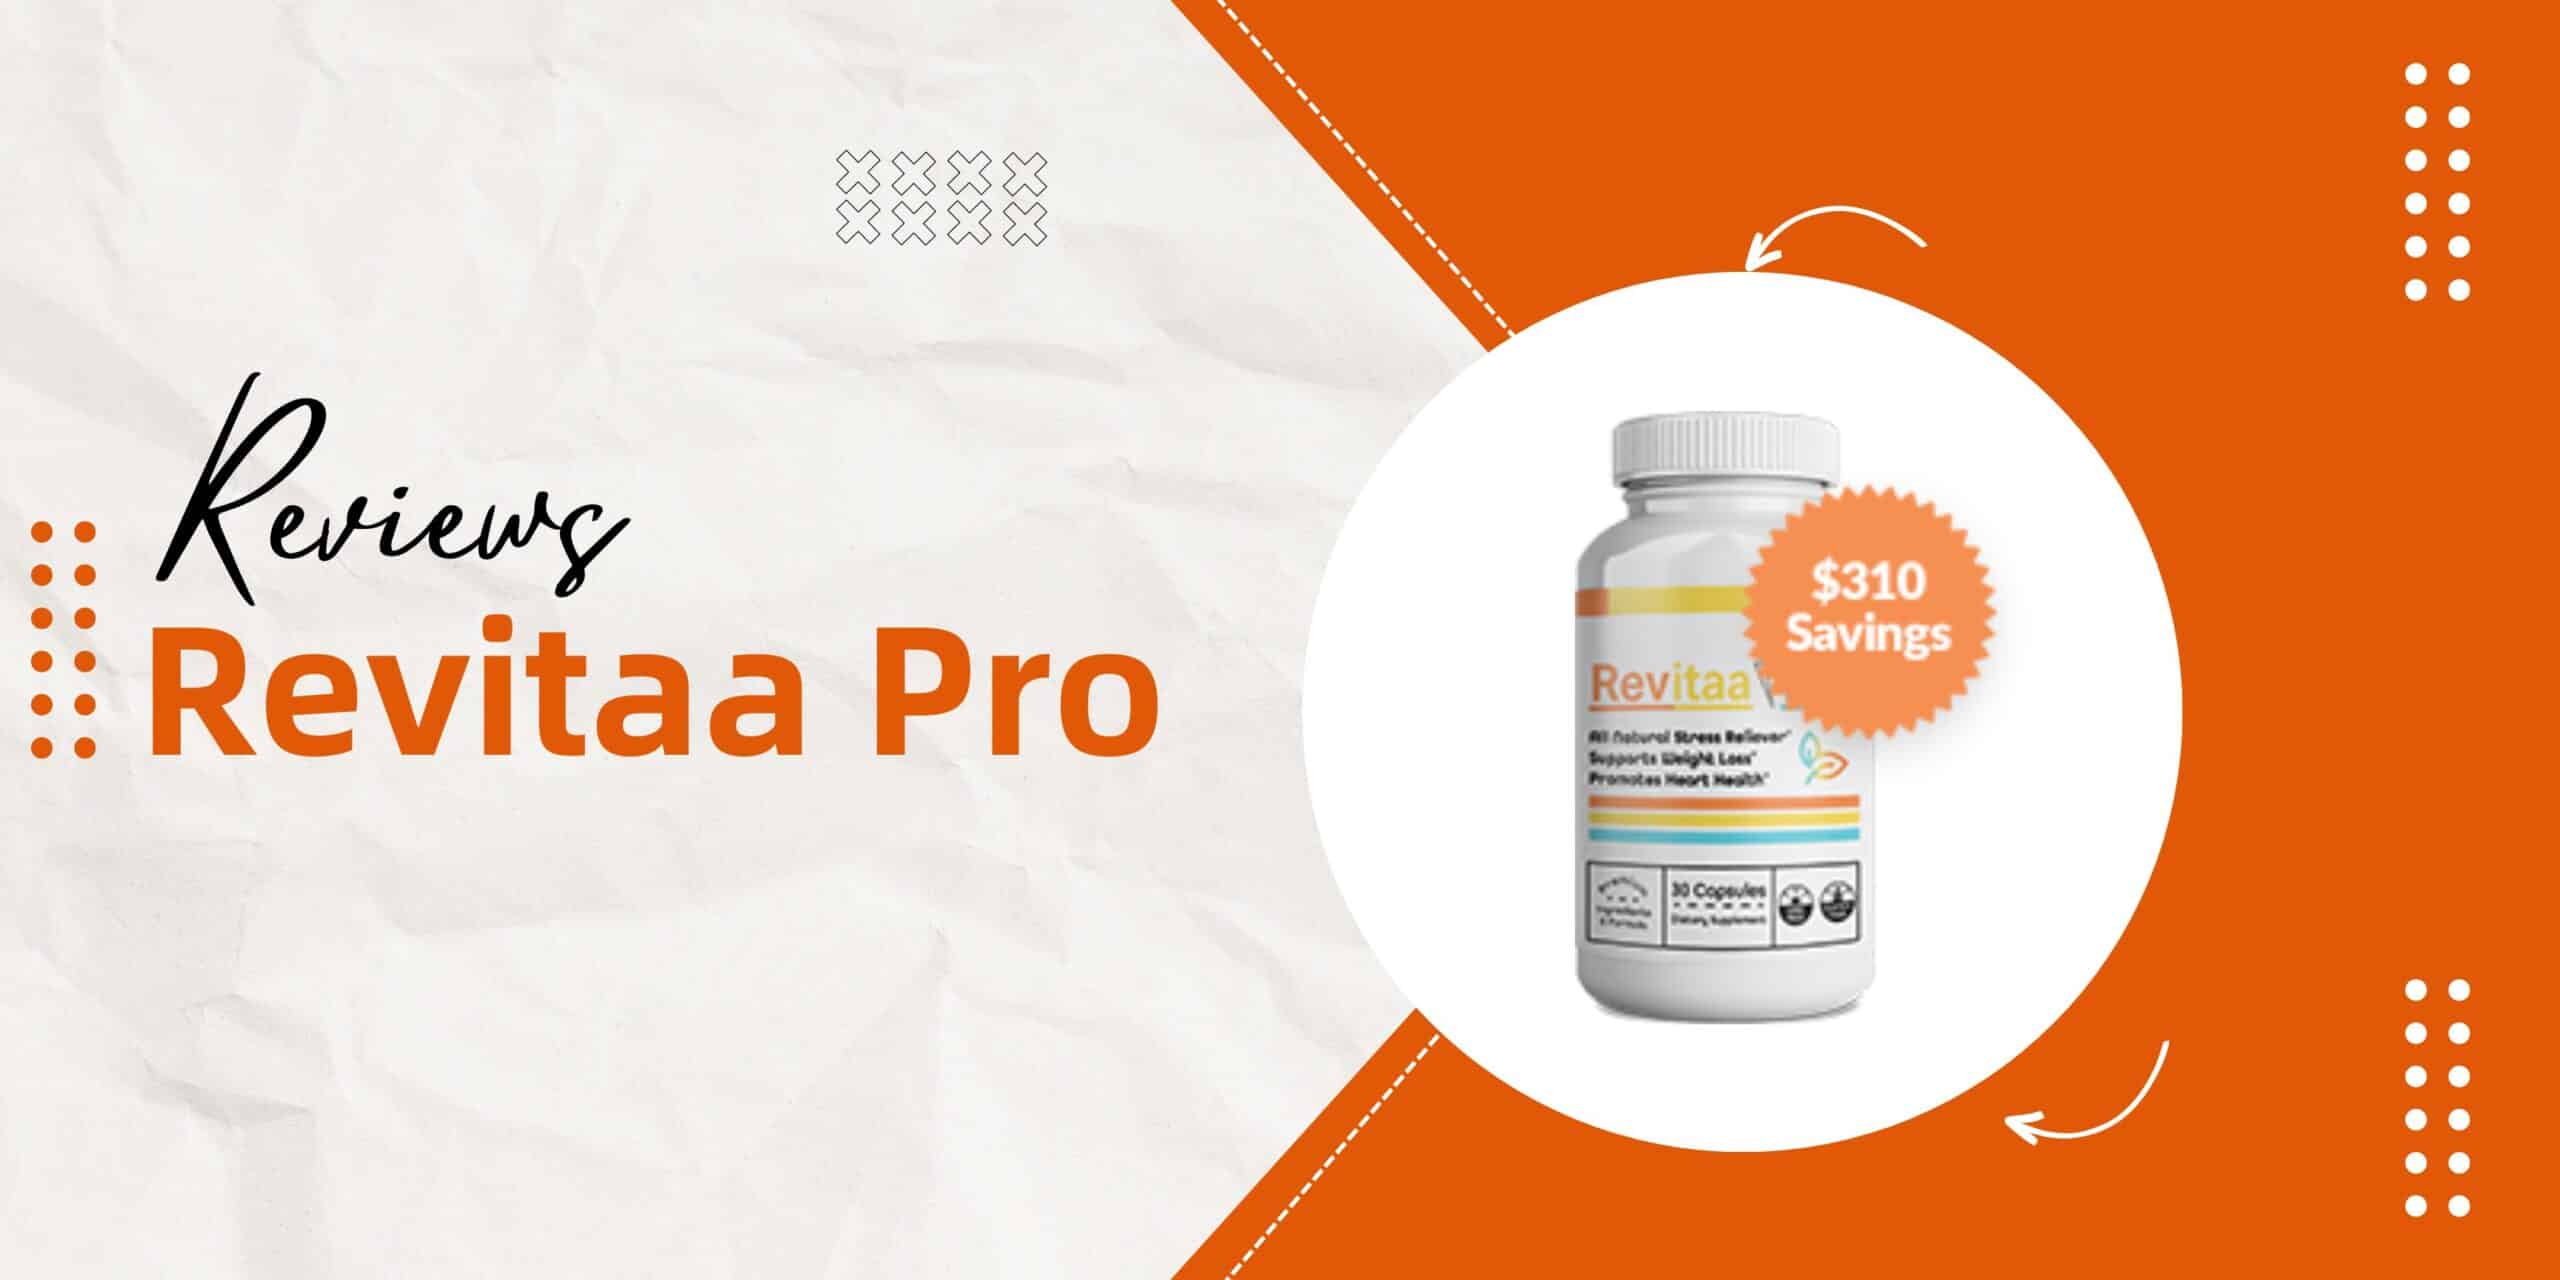 Revitaa Pro for weight loss